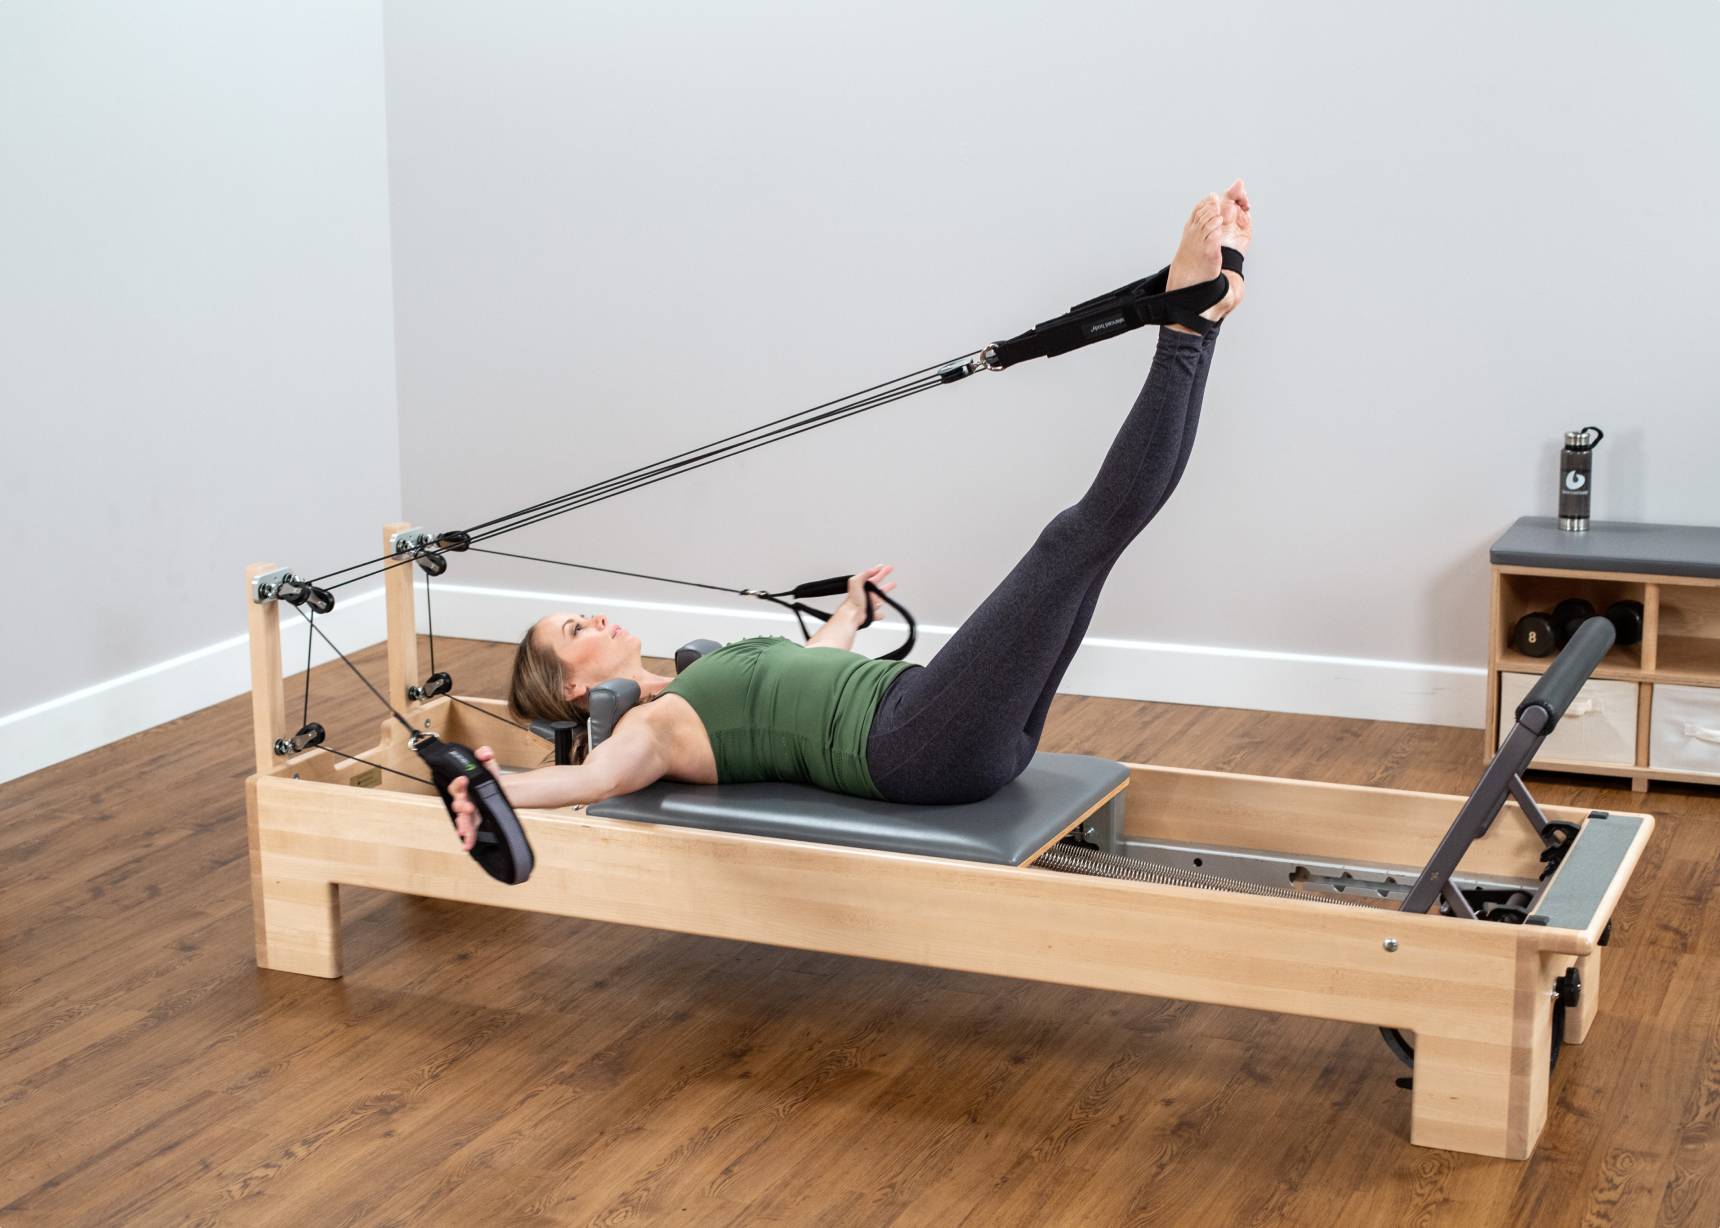 Konnector Kit on Studio Reformer in-use product photo